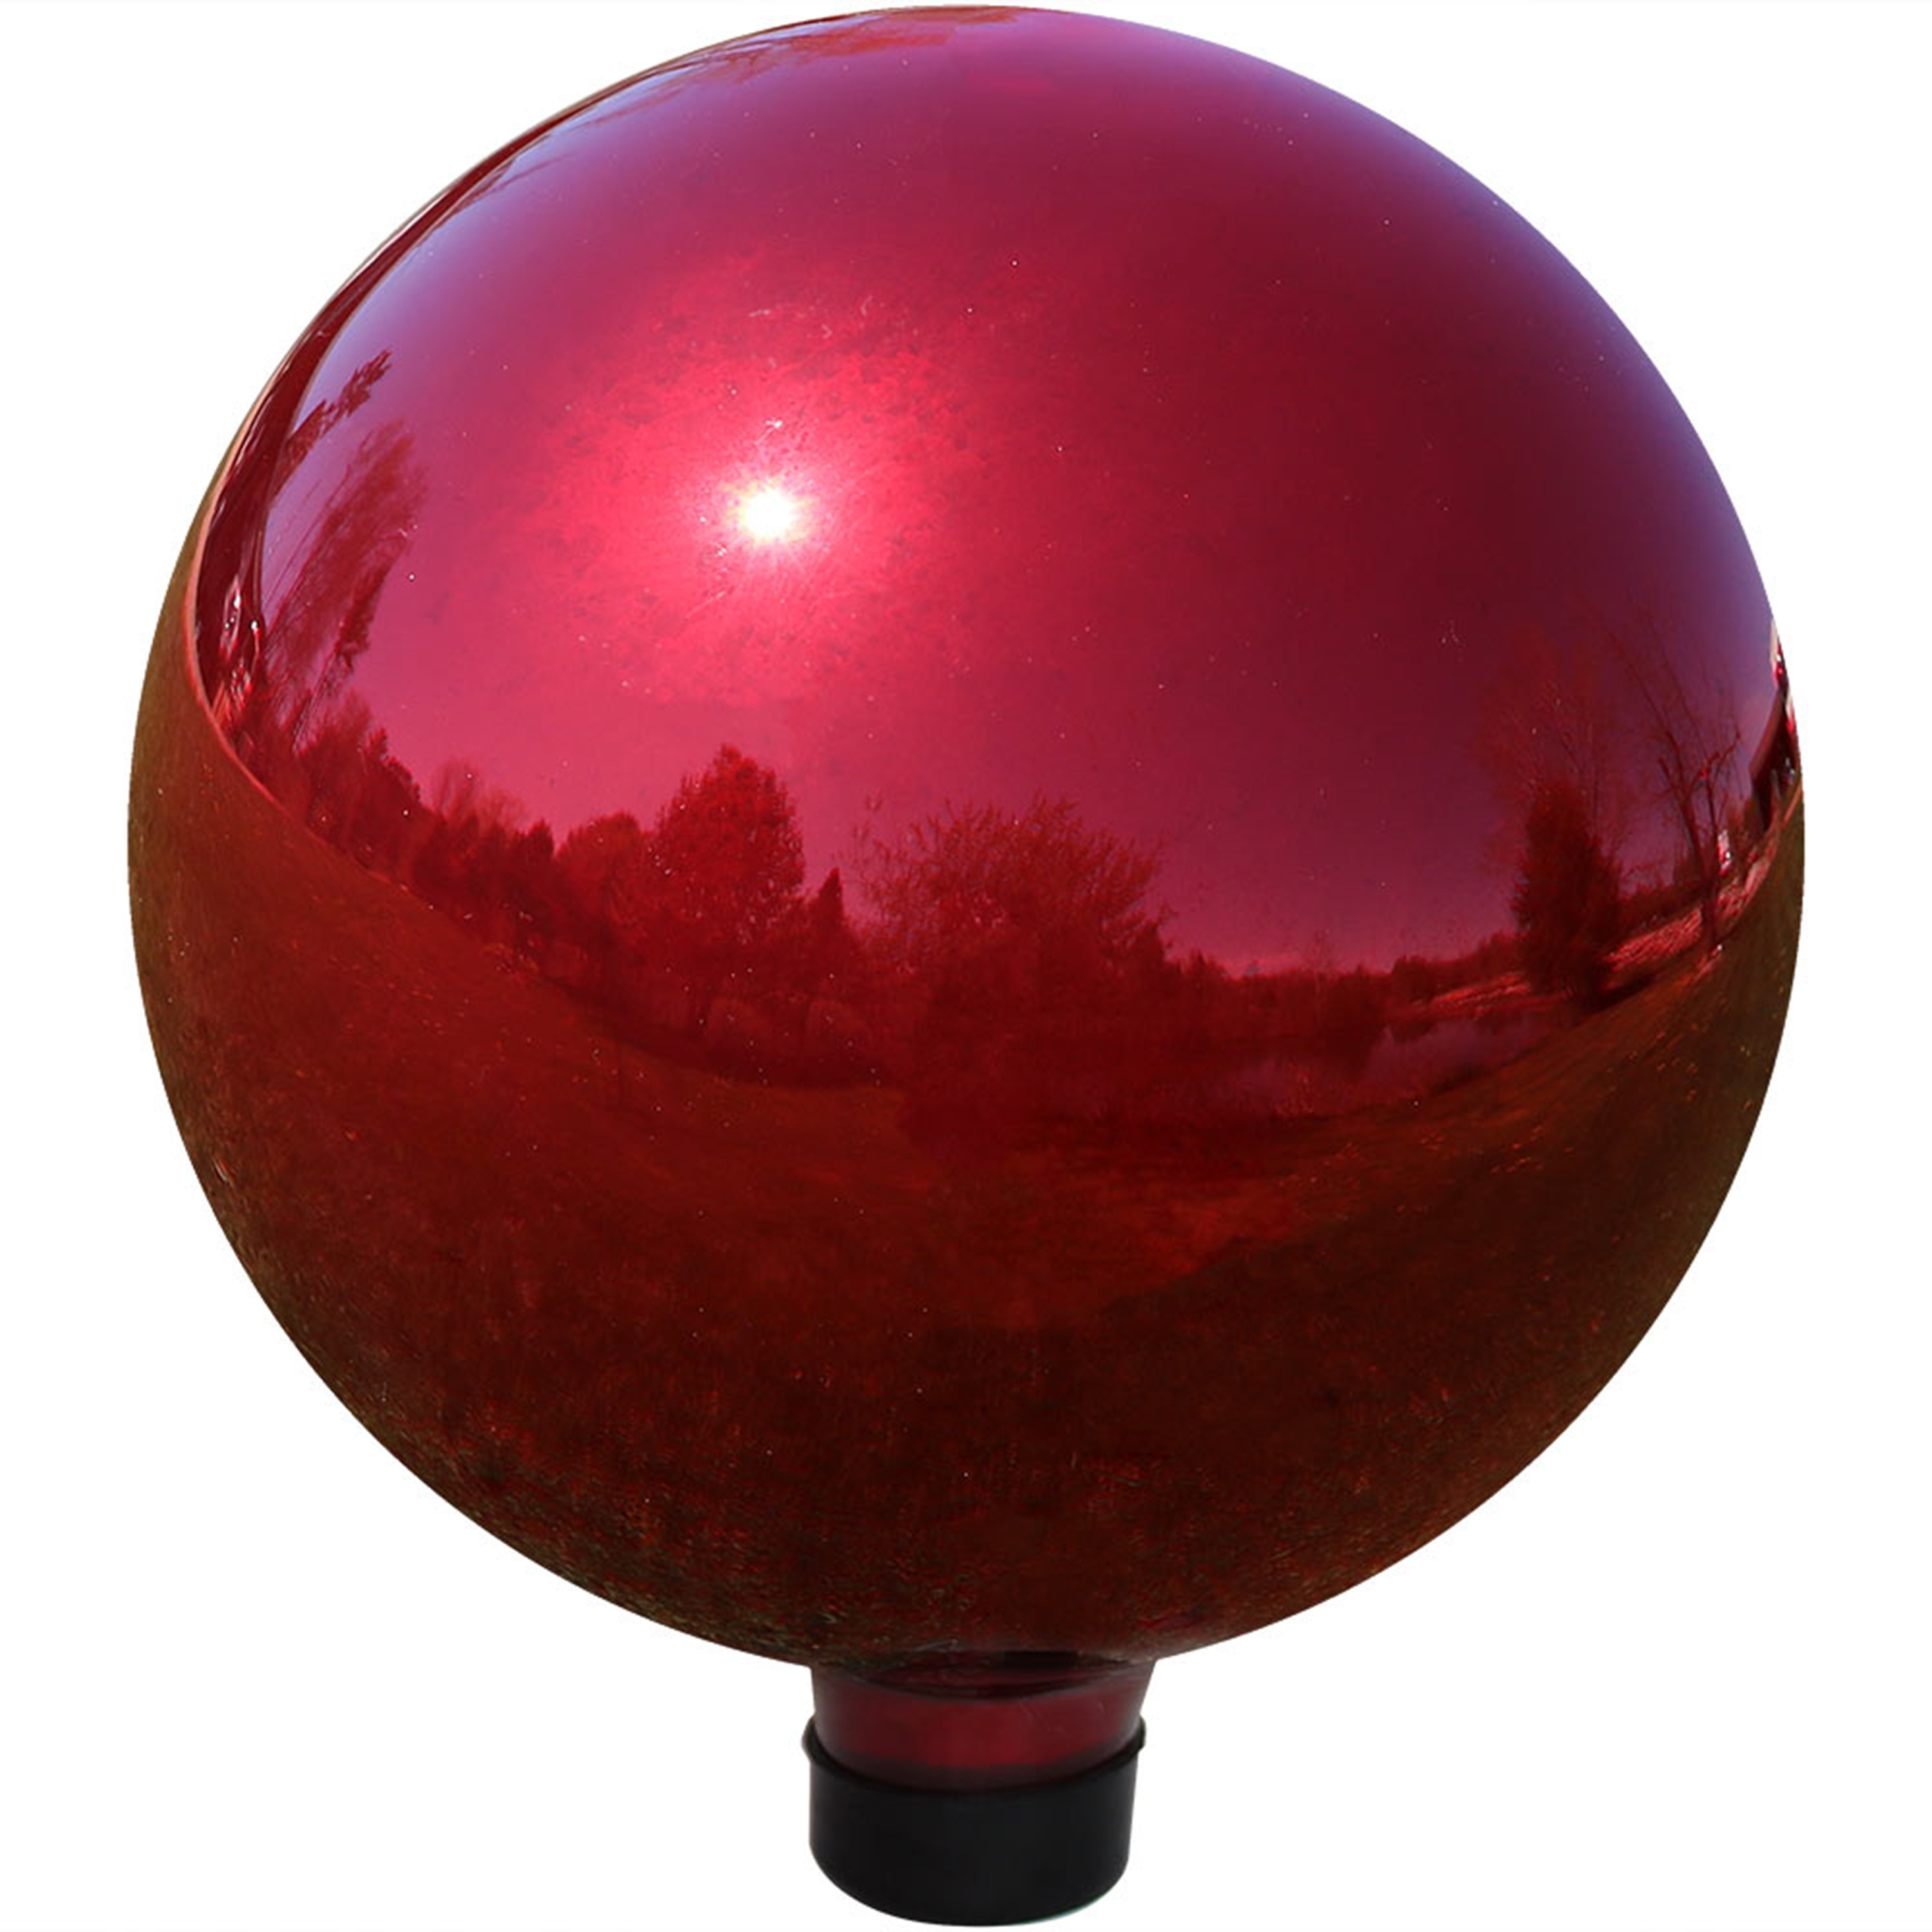 Sunnydaze 10-Inch Glass Gazing Globe Ball with Mirrored Finish, Color Options Available, Red